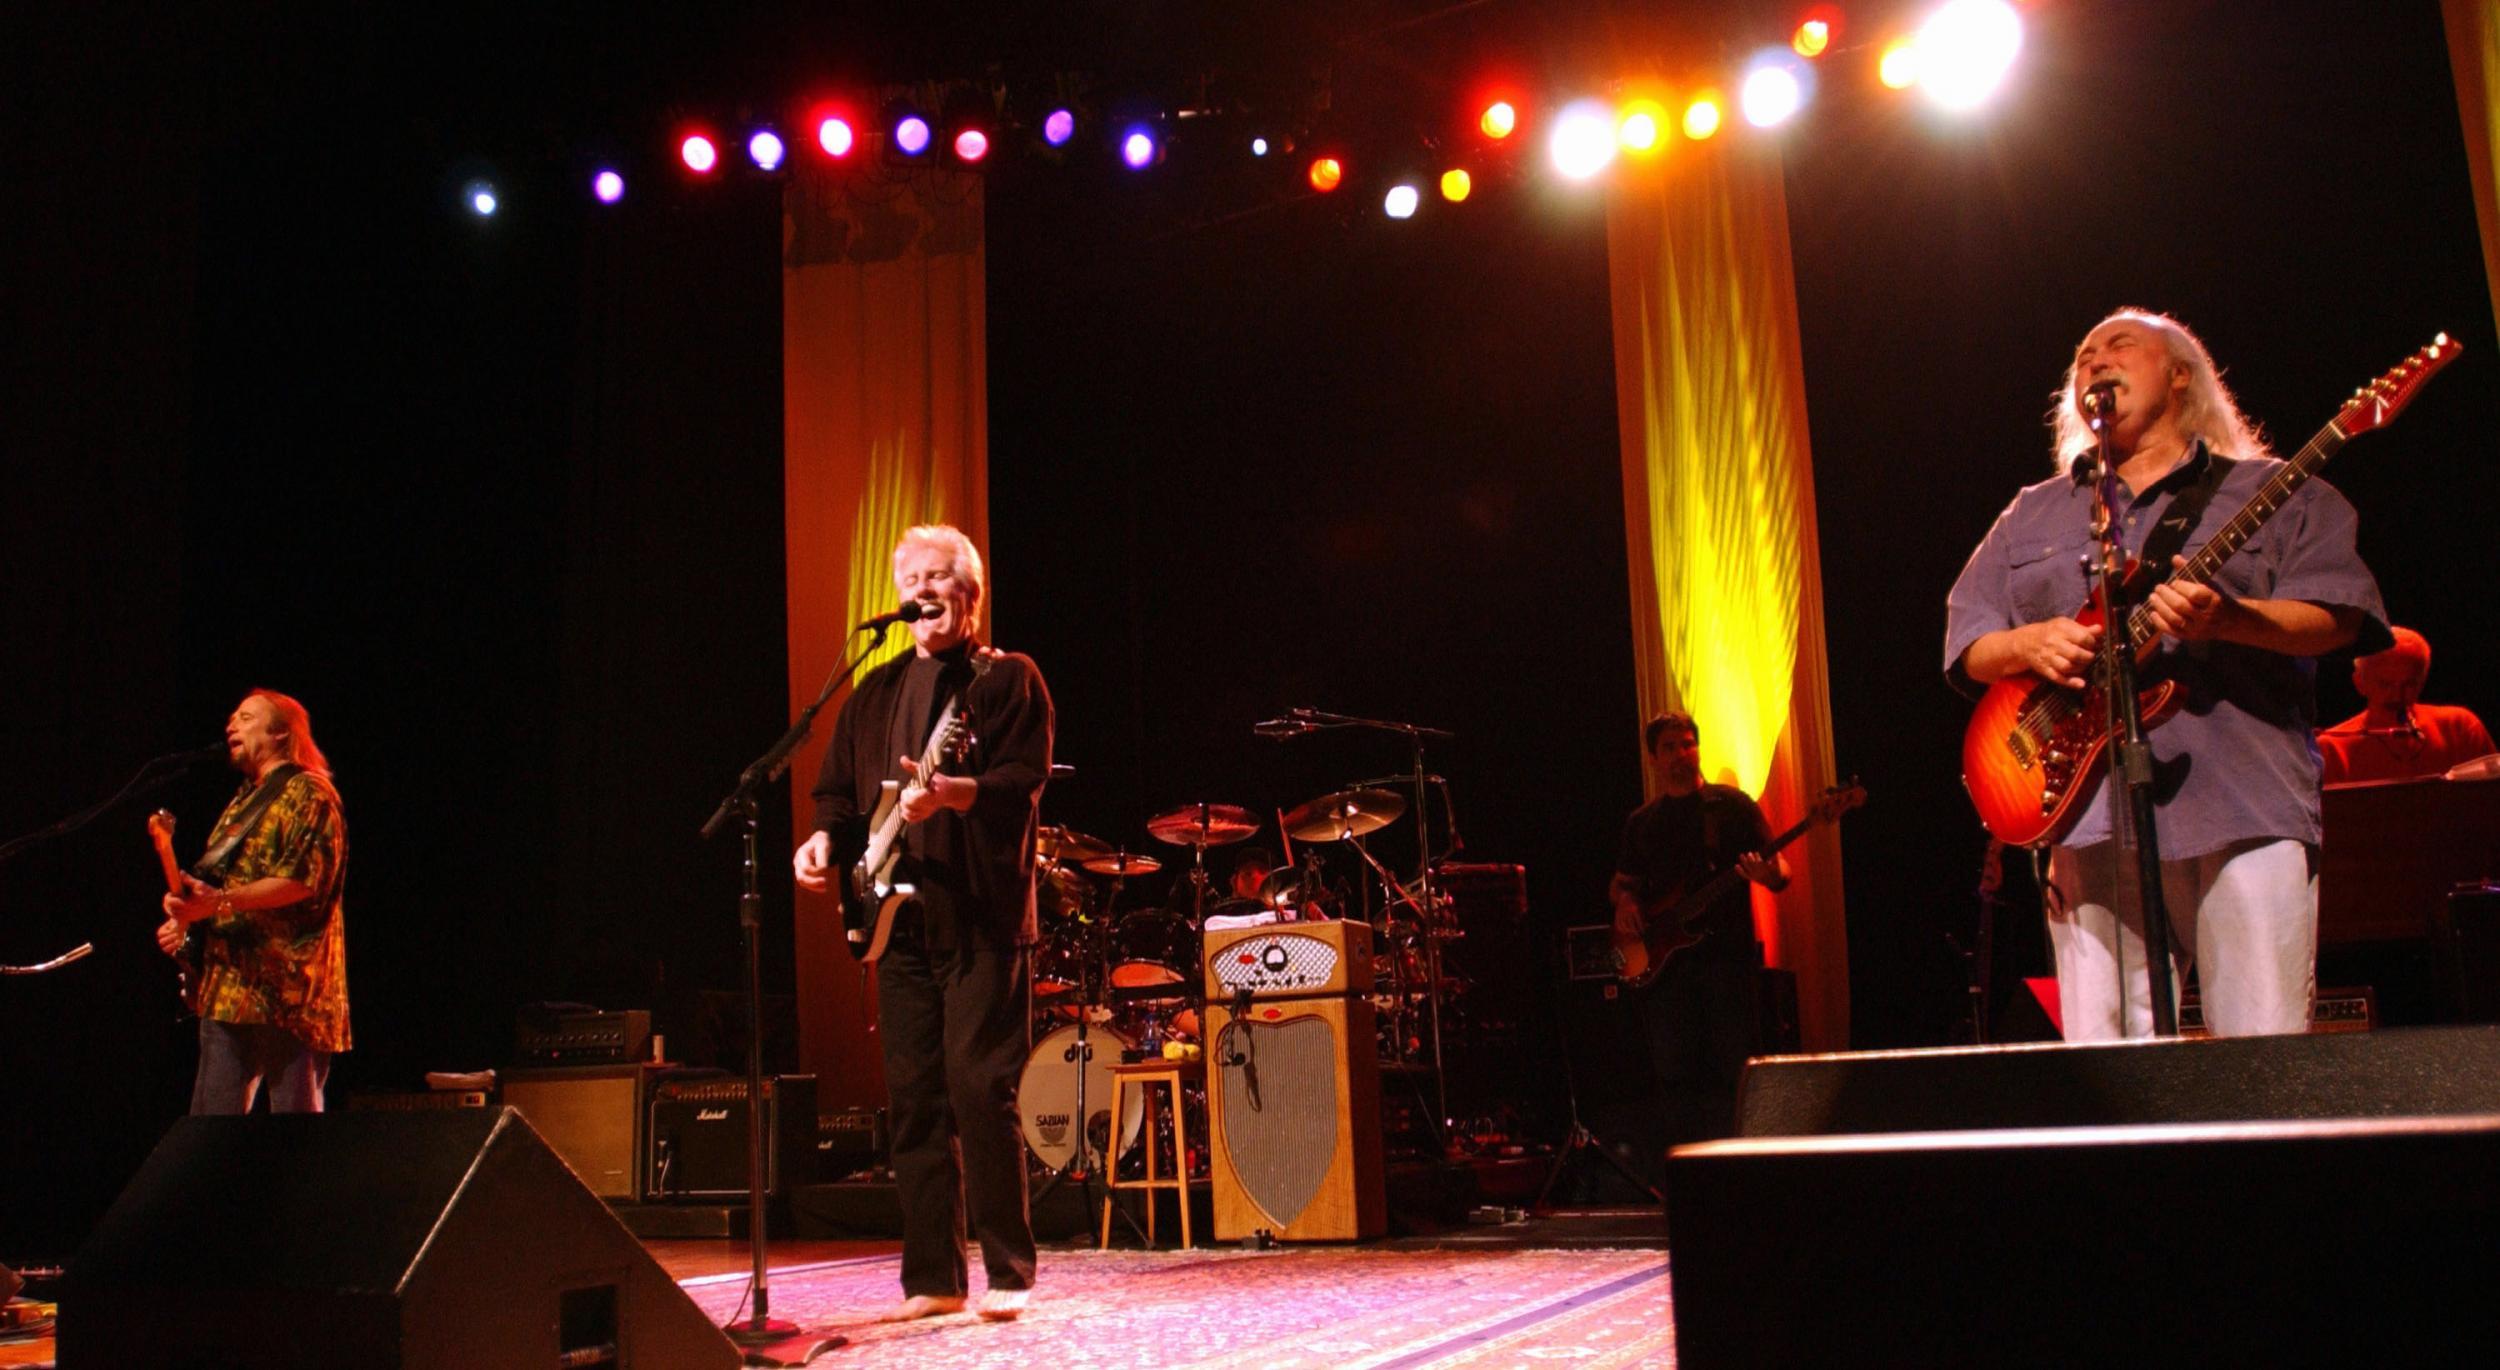 Music group Crosby Stills & Nash perform at the Assembly Hall April 13, 2003 in Champaign, Illinois. Credit: Scott Harrison/Getty Images.